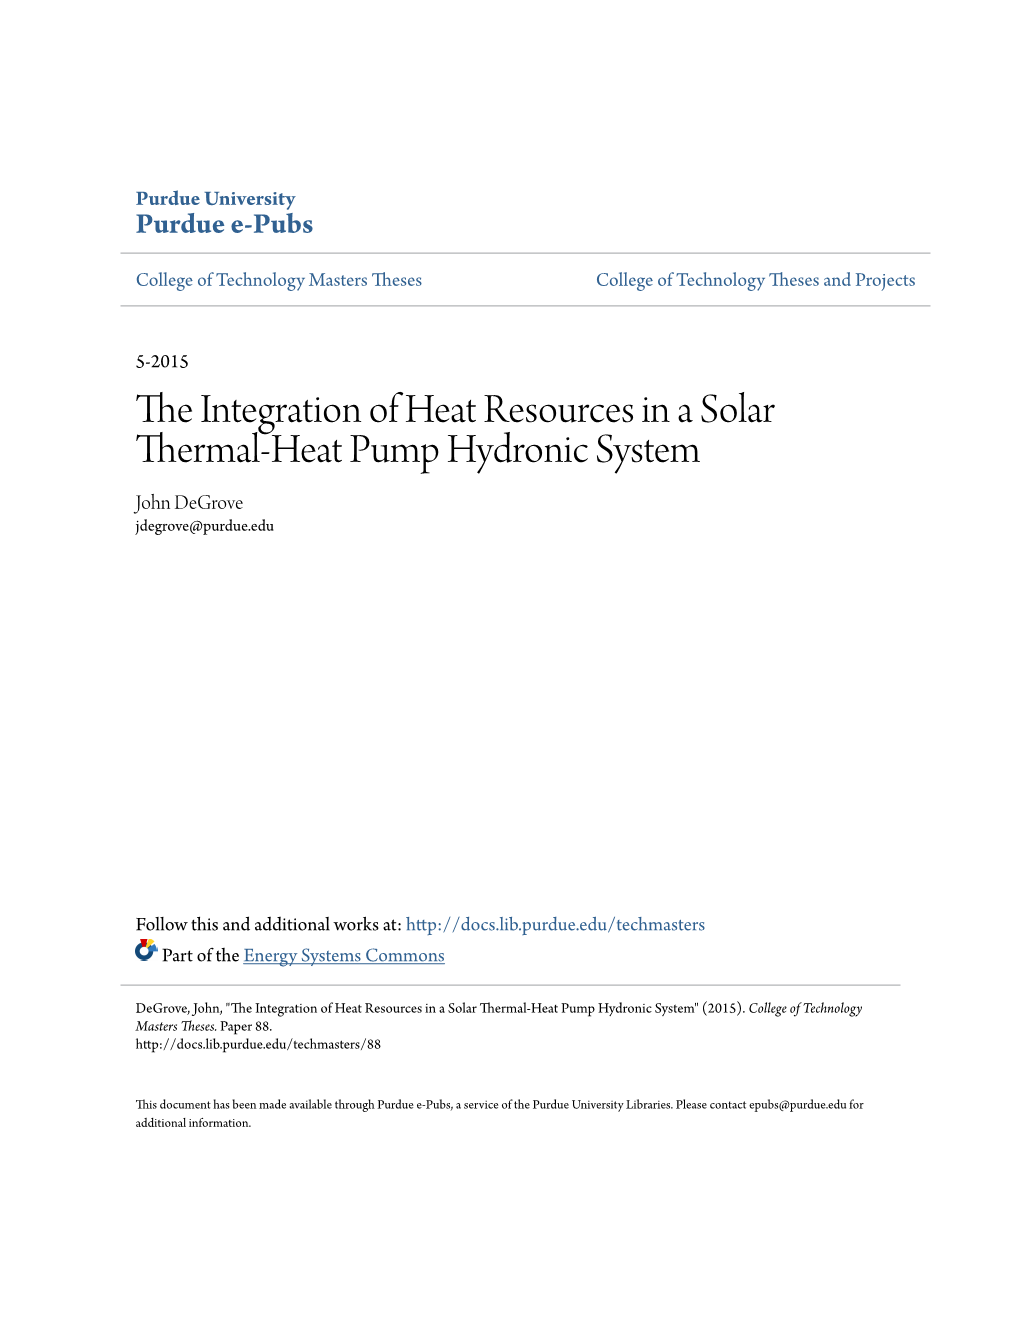 The Integration of Heat Resources in a Solar Thermal-Heat Pump Hydronic System